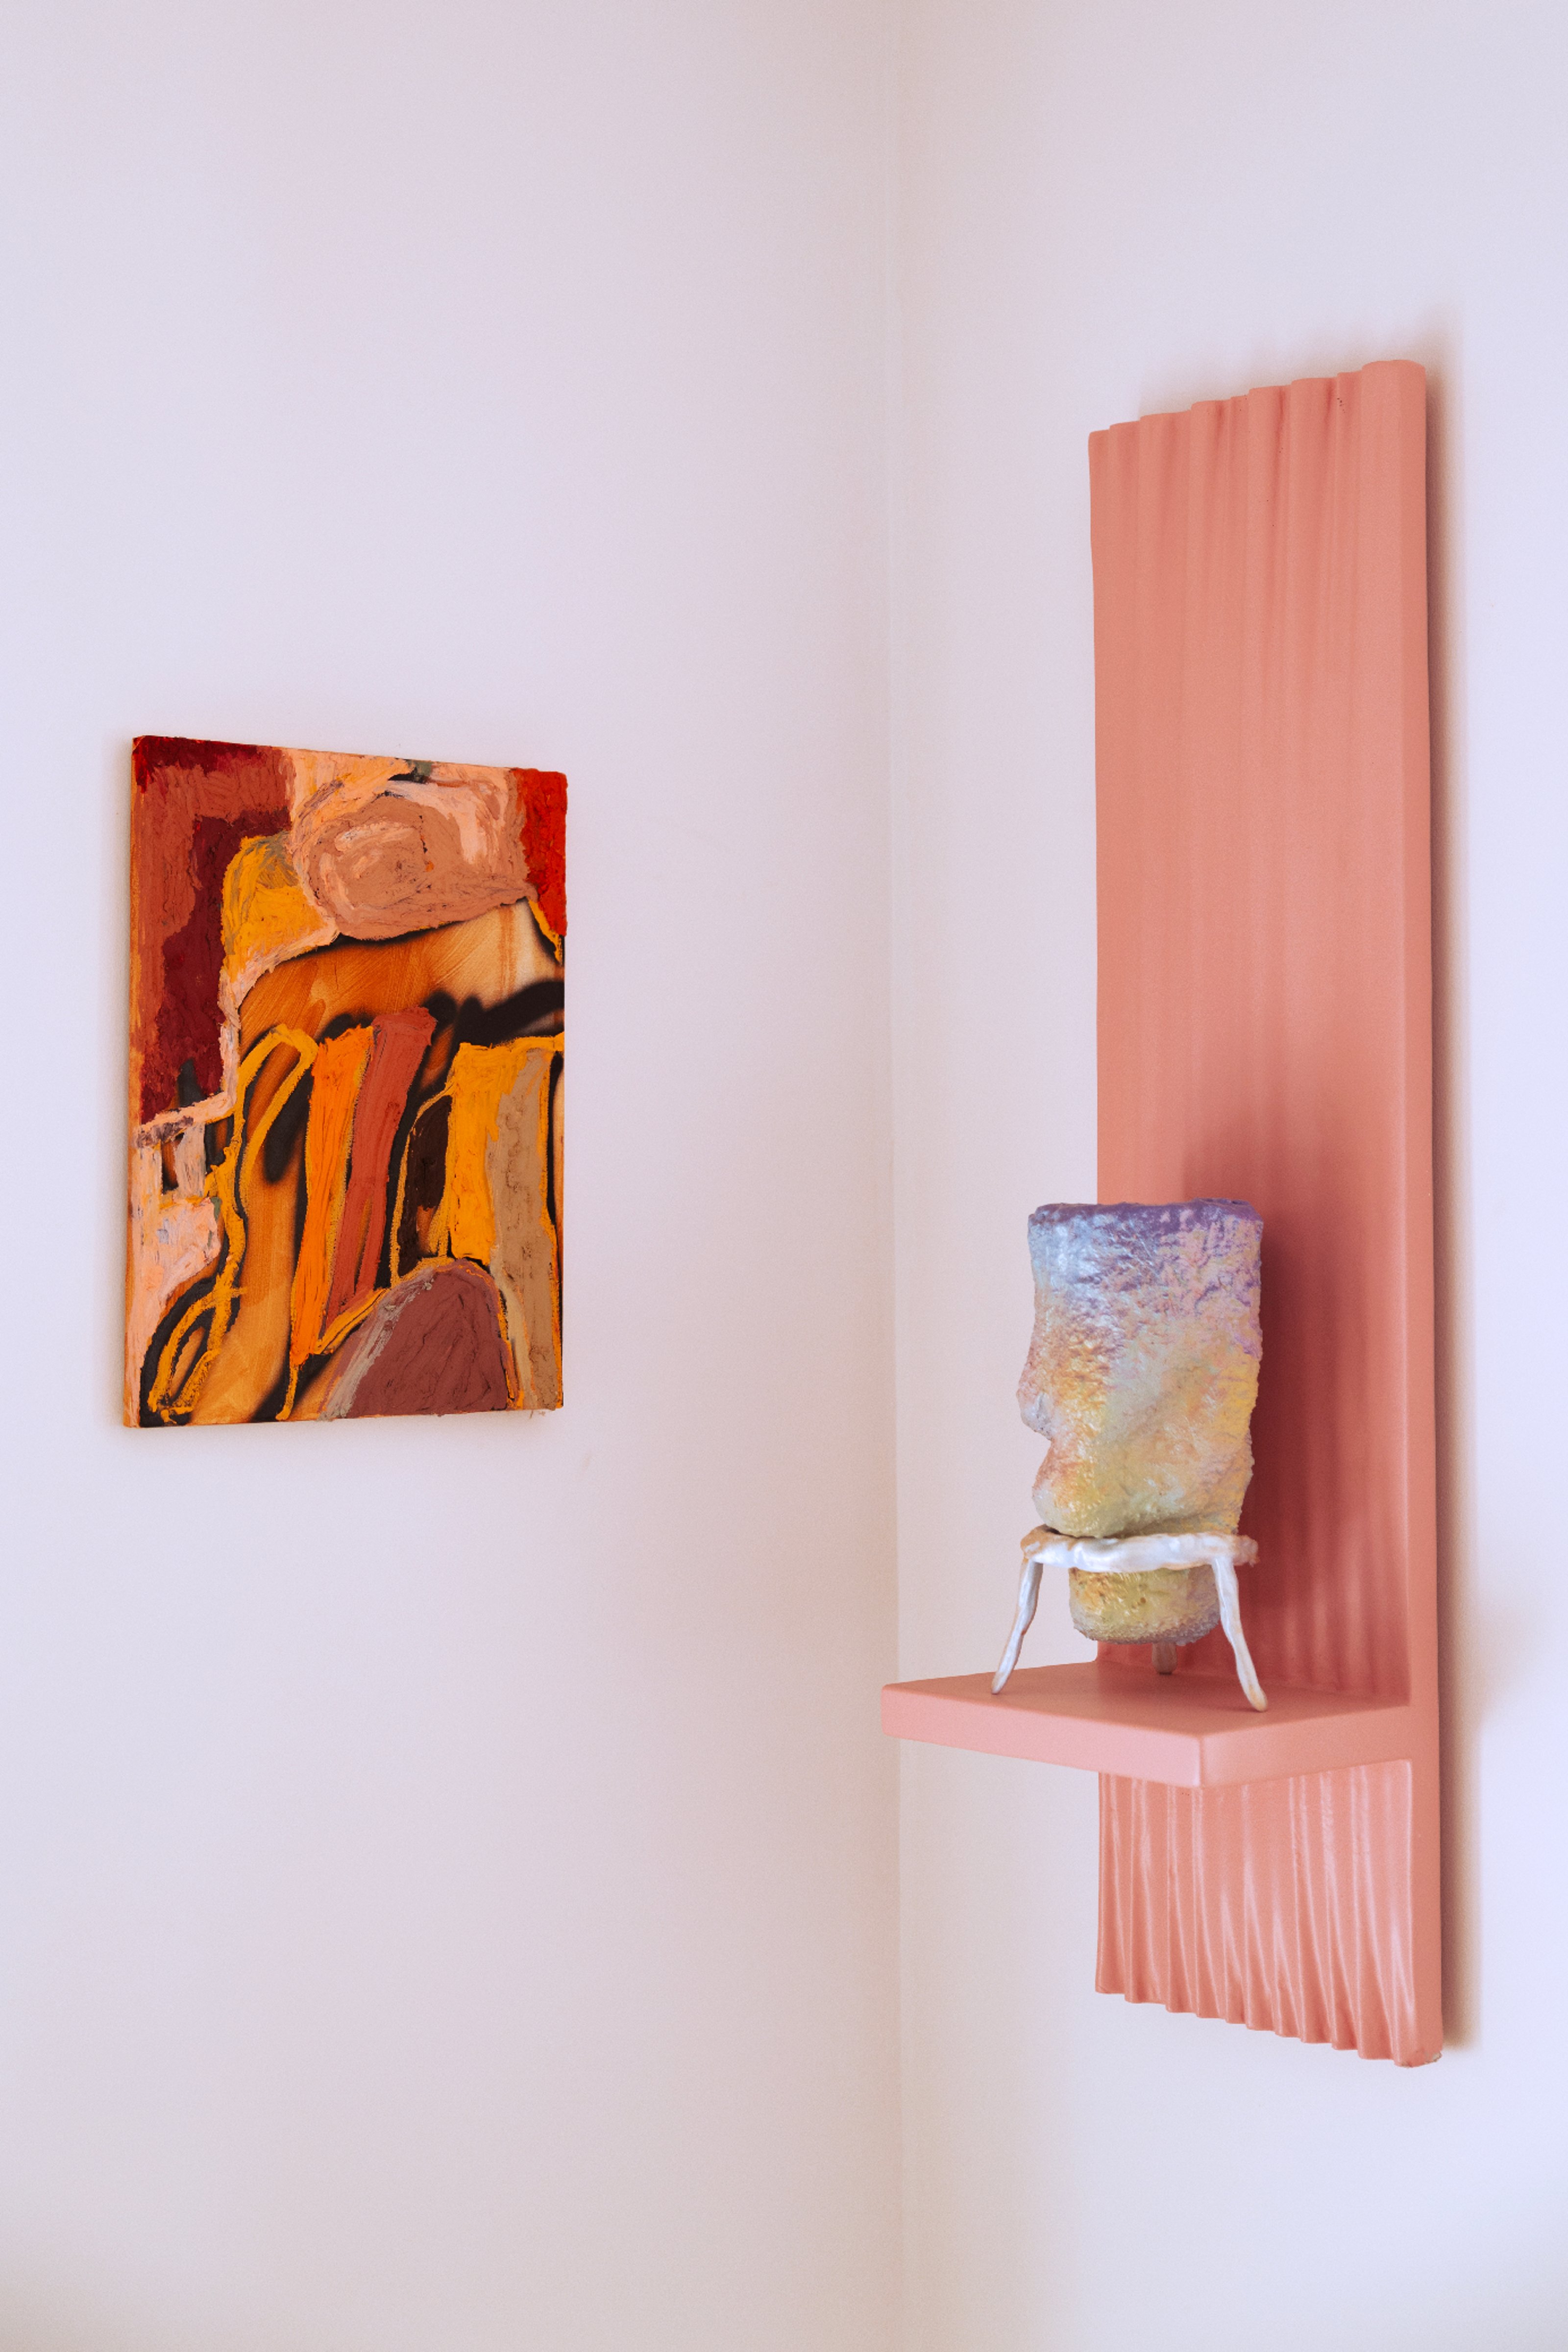 An abstract painting in shades of pink placed in the corner of a white-walled room. A ceramic object on a wall-mounted pink shelf opposite.